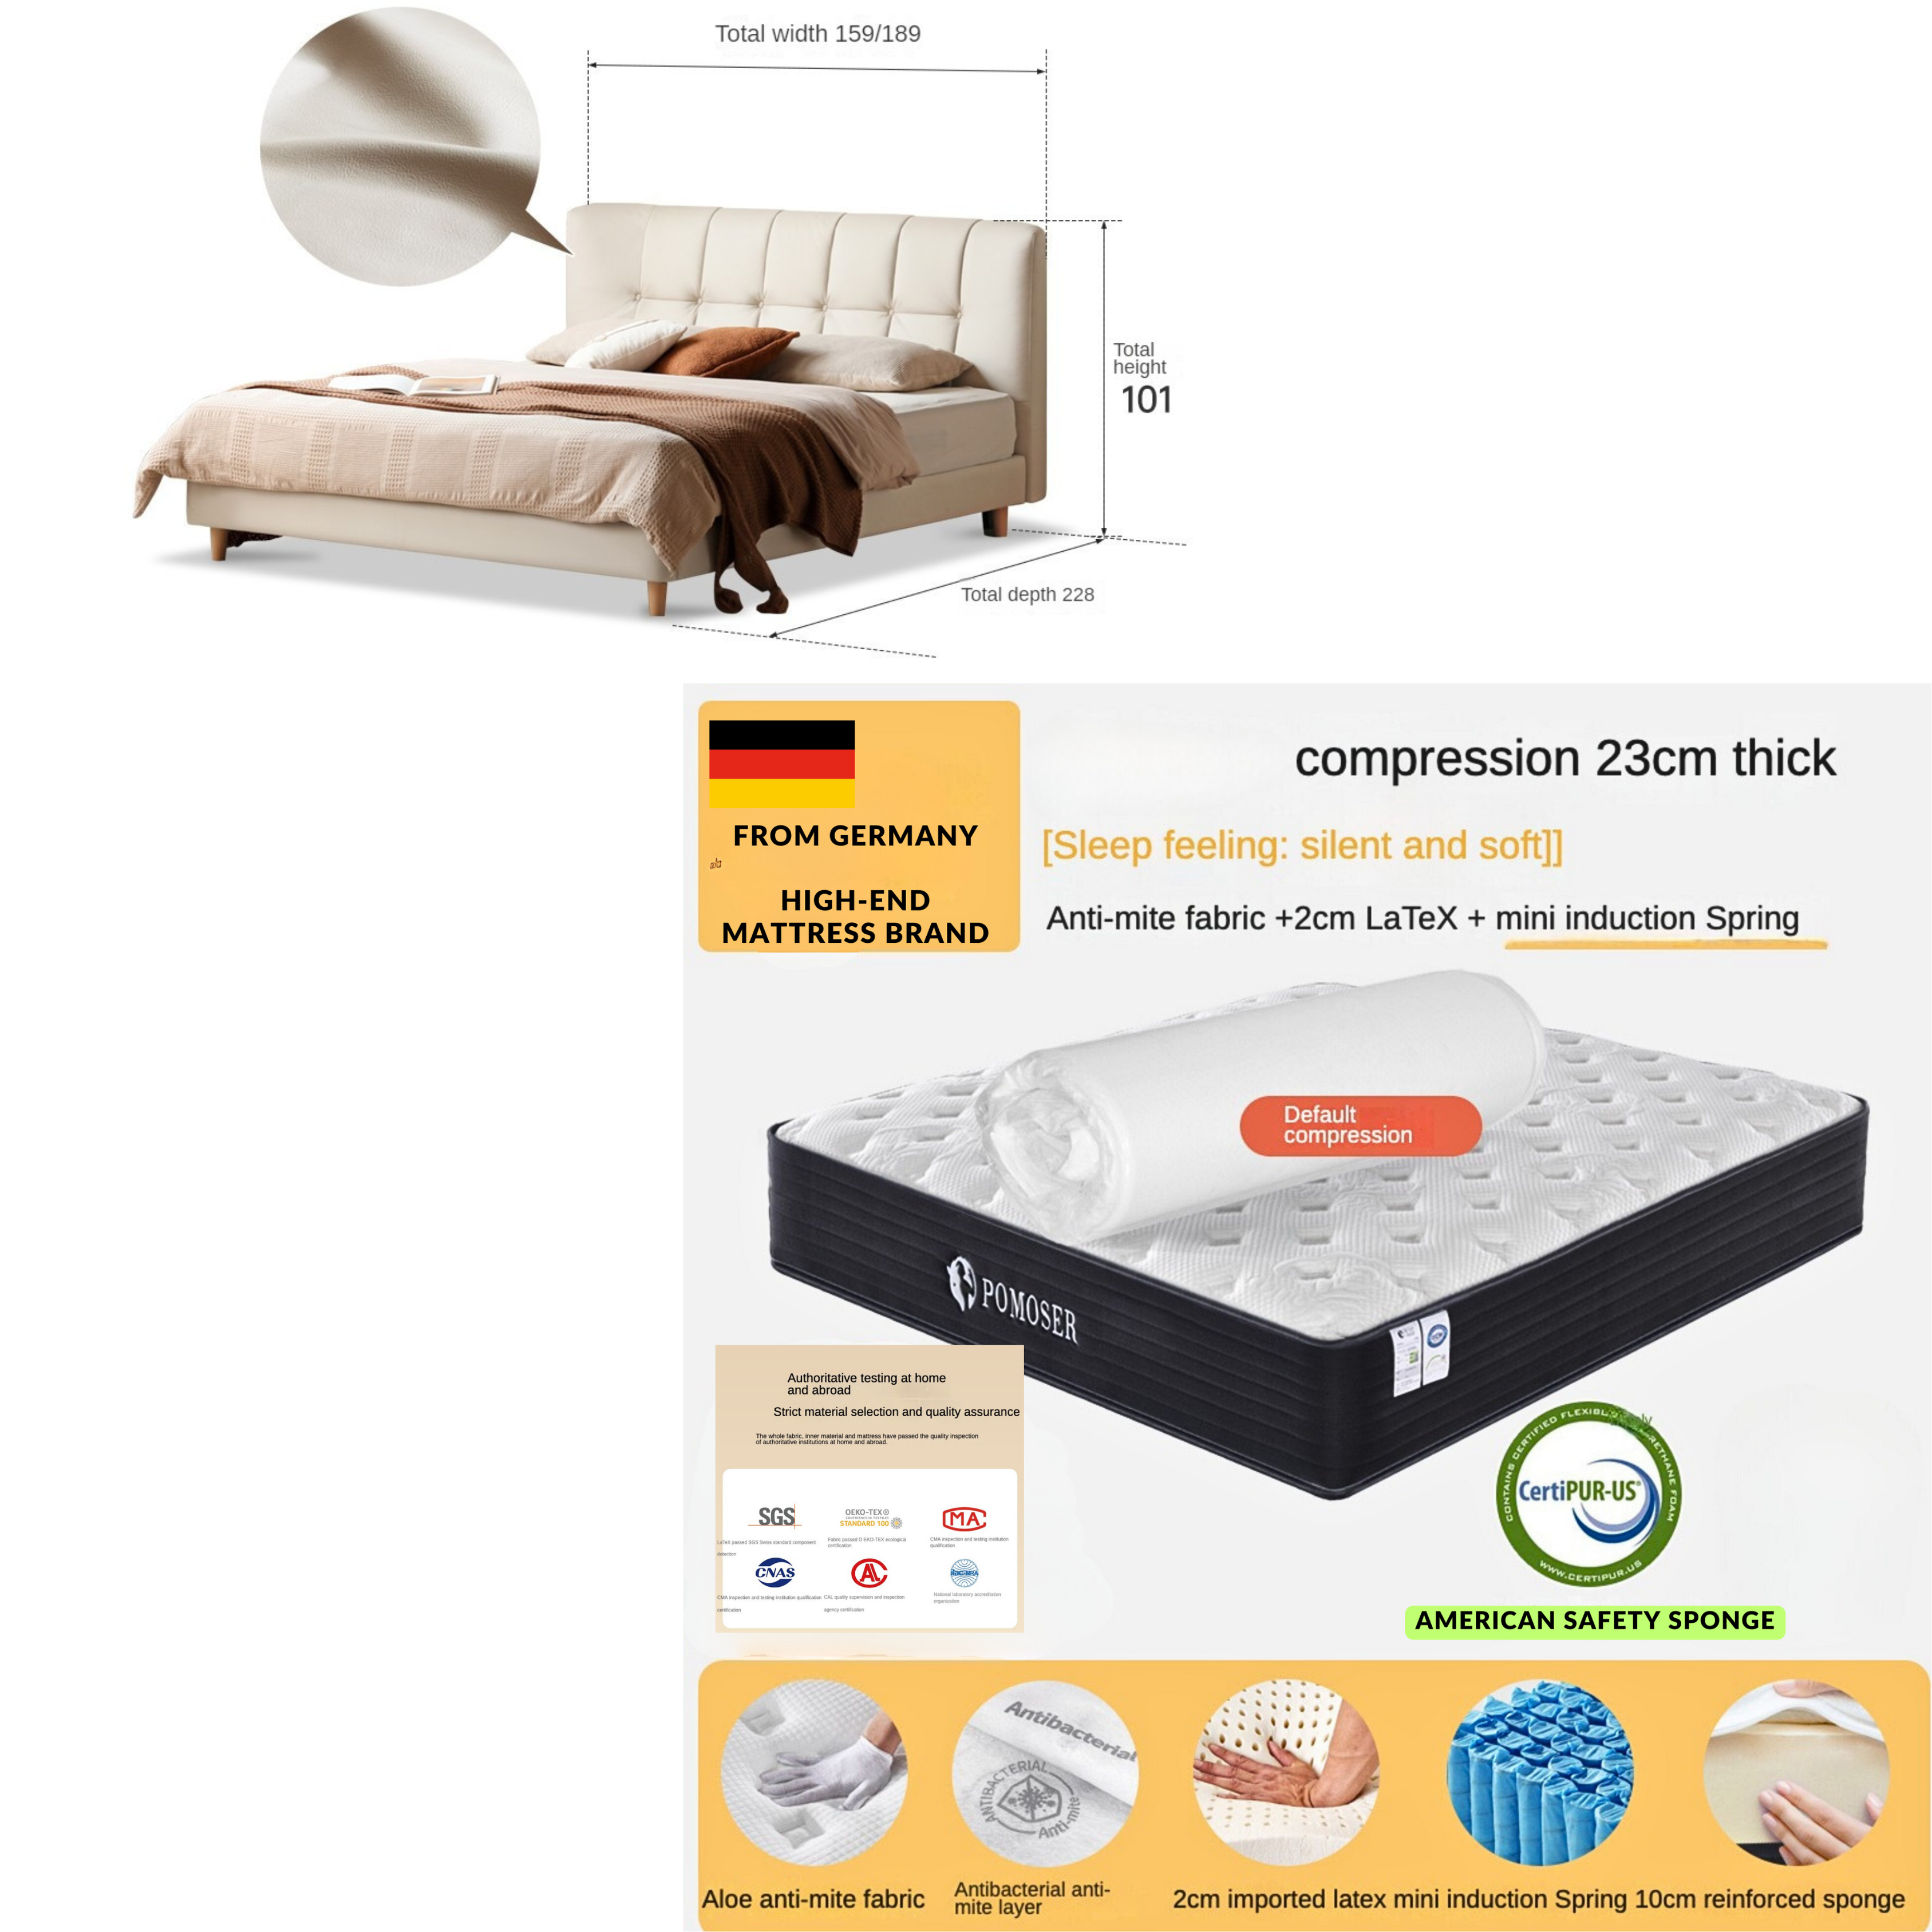 Technology cloth white cream style edge bed_)